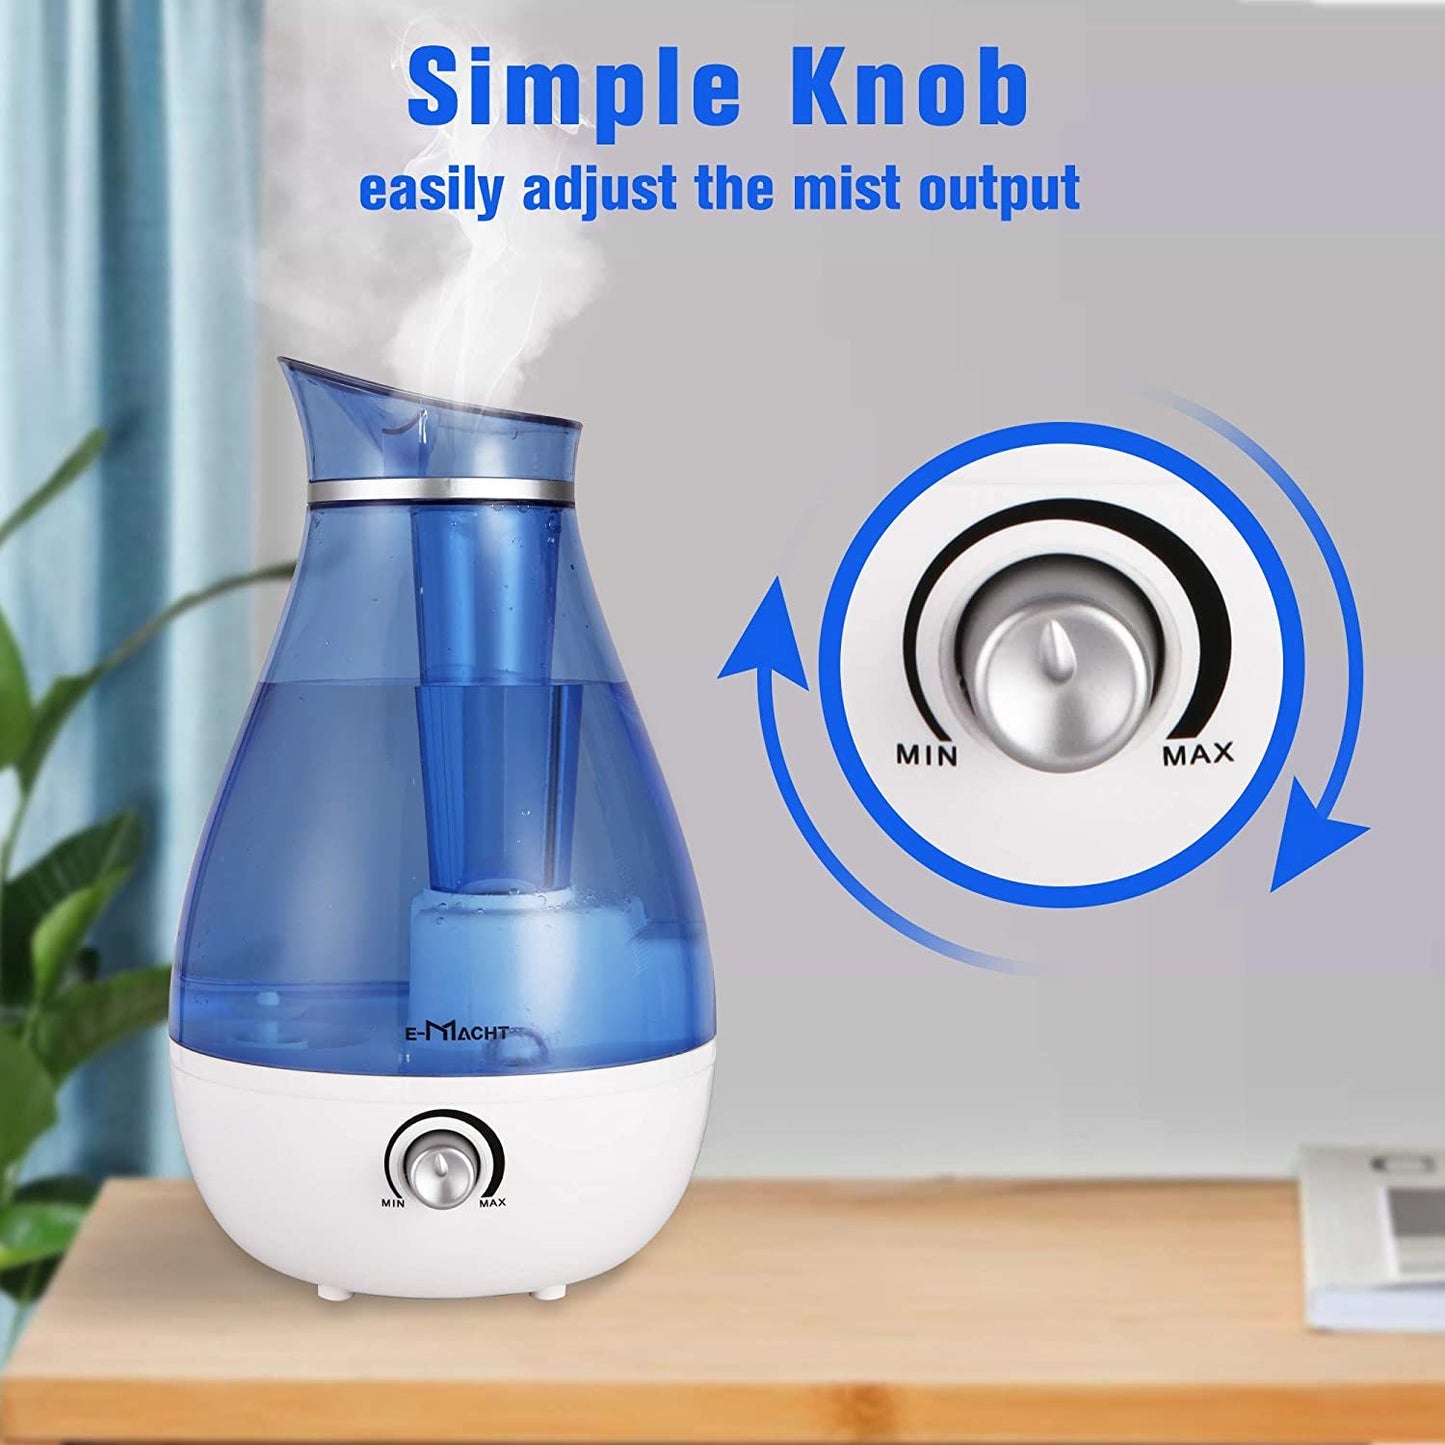 Bosonshop Humidifiers for Bedroom Quiet Ultrasonic Cool Mist Humidifier 2.5L with Auto Shut-Off, Night Light and Adjustable Mist Output, Less Than 30dB, Blue